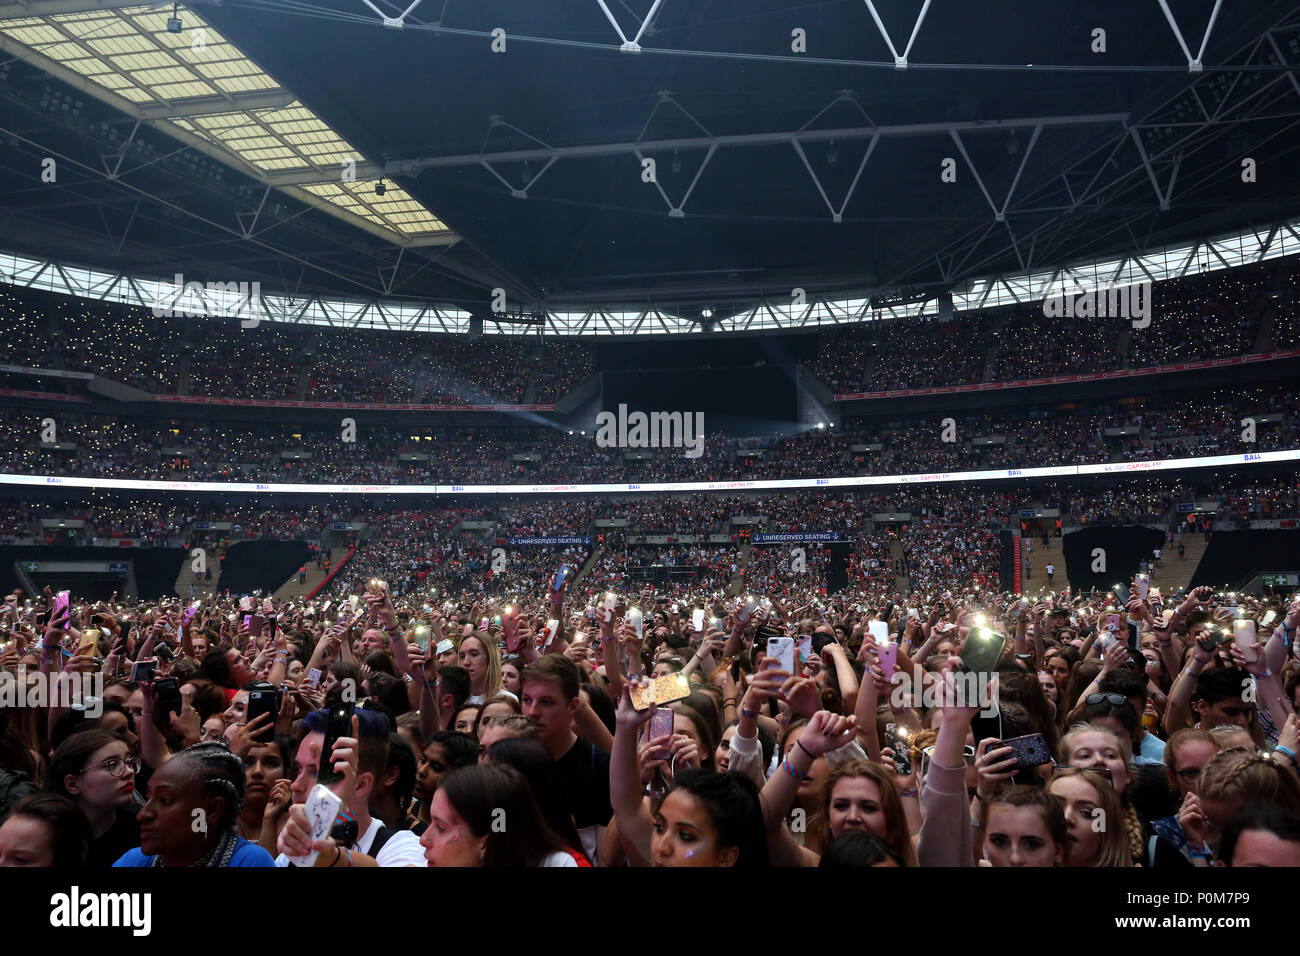 Fans in the crowd hold up their mobiles with the torches turned on during Capital's Summertime Ball with Vodafone at Wembley Stadium, London. PRESS ASSOCIATION Photo. This summer's hottest artists performed live for 80,000 Capital listeners at Wembley Stadium at the UK's biggest summer party. Performers included Camila Cabello, Shawn Mendes, Rita Ora, Charlie Puth, Jess Glyne, Craig David, Anne-Marie, Rudimental, Sean Paul, Clean Bandit, James Arthur, Sigala, Years & Years, Jax Jones, Raye, Jonas Blue, Mabel, Stefflon Don, Yungen and G-Eazy. Picture date: Saturday June 9, 2018. Photo credit sh Stock Photo